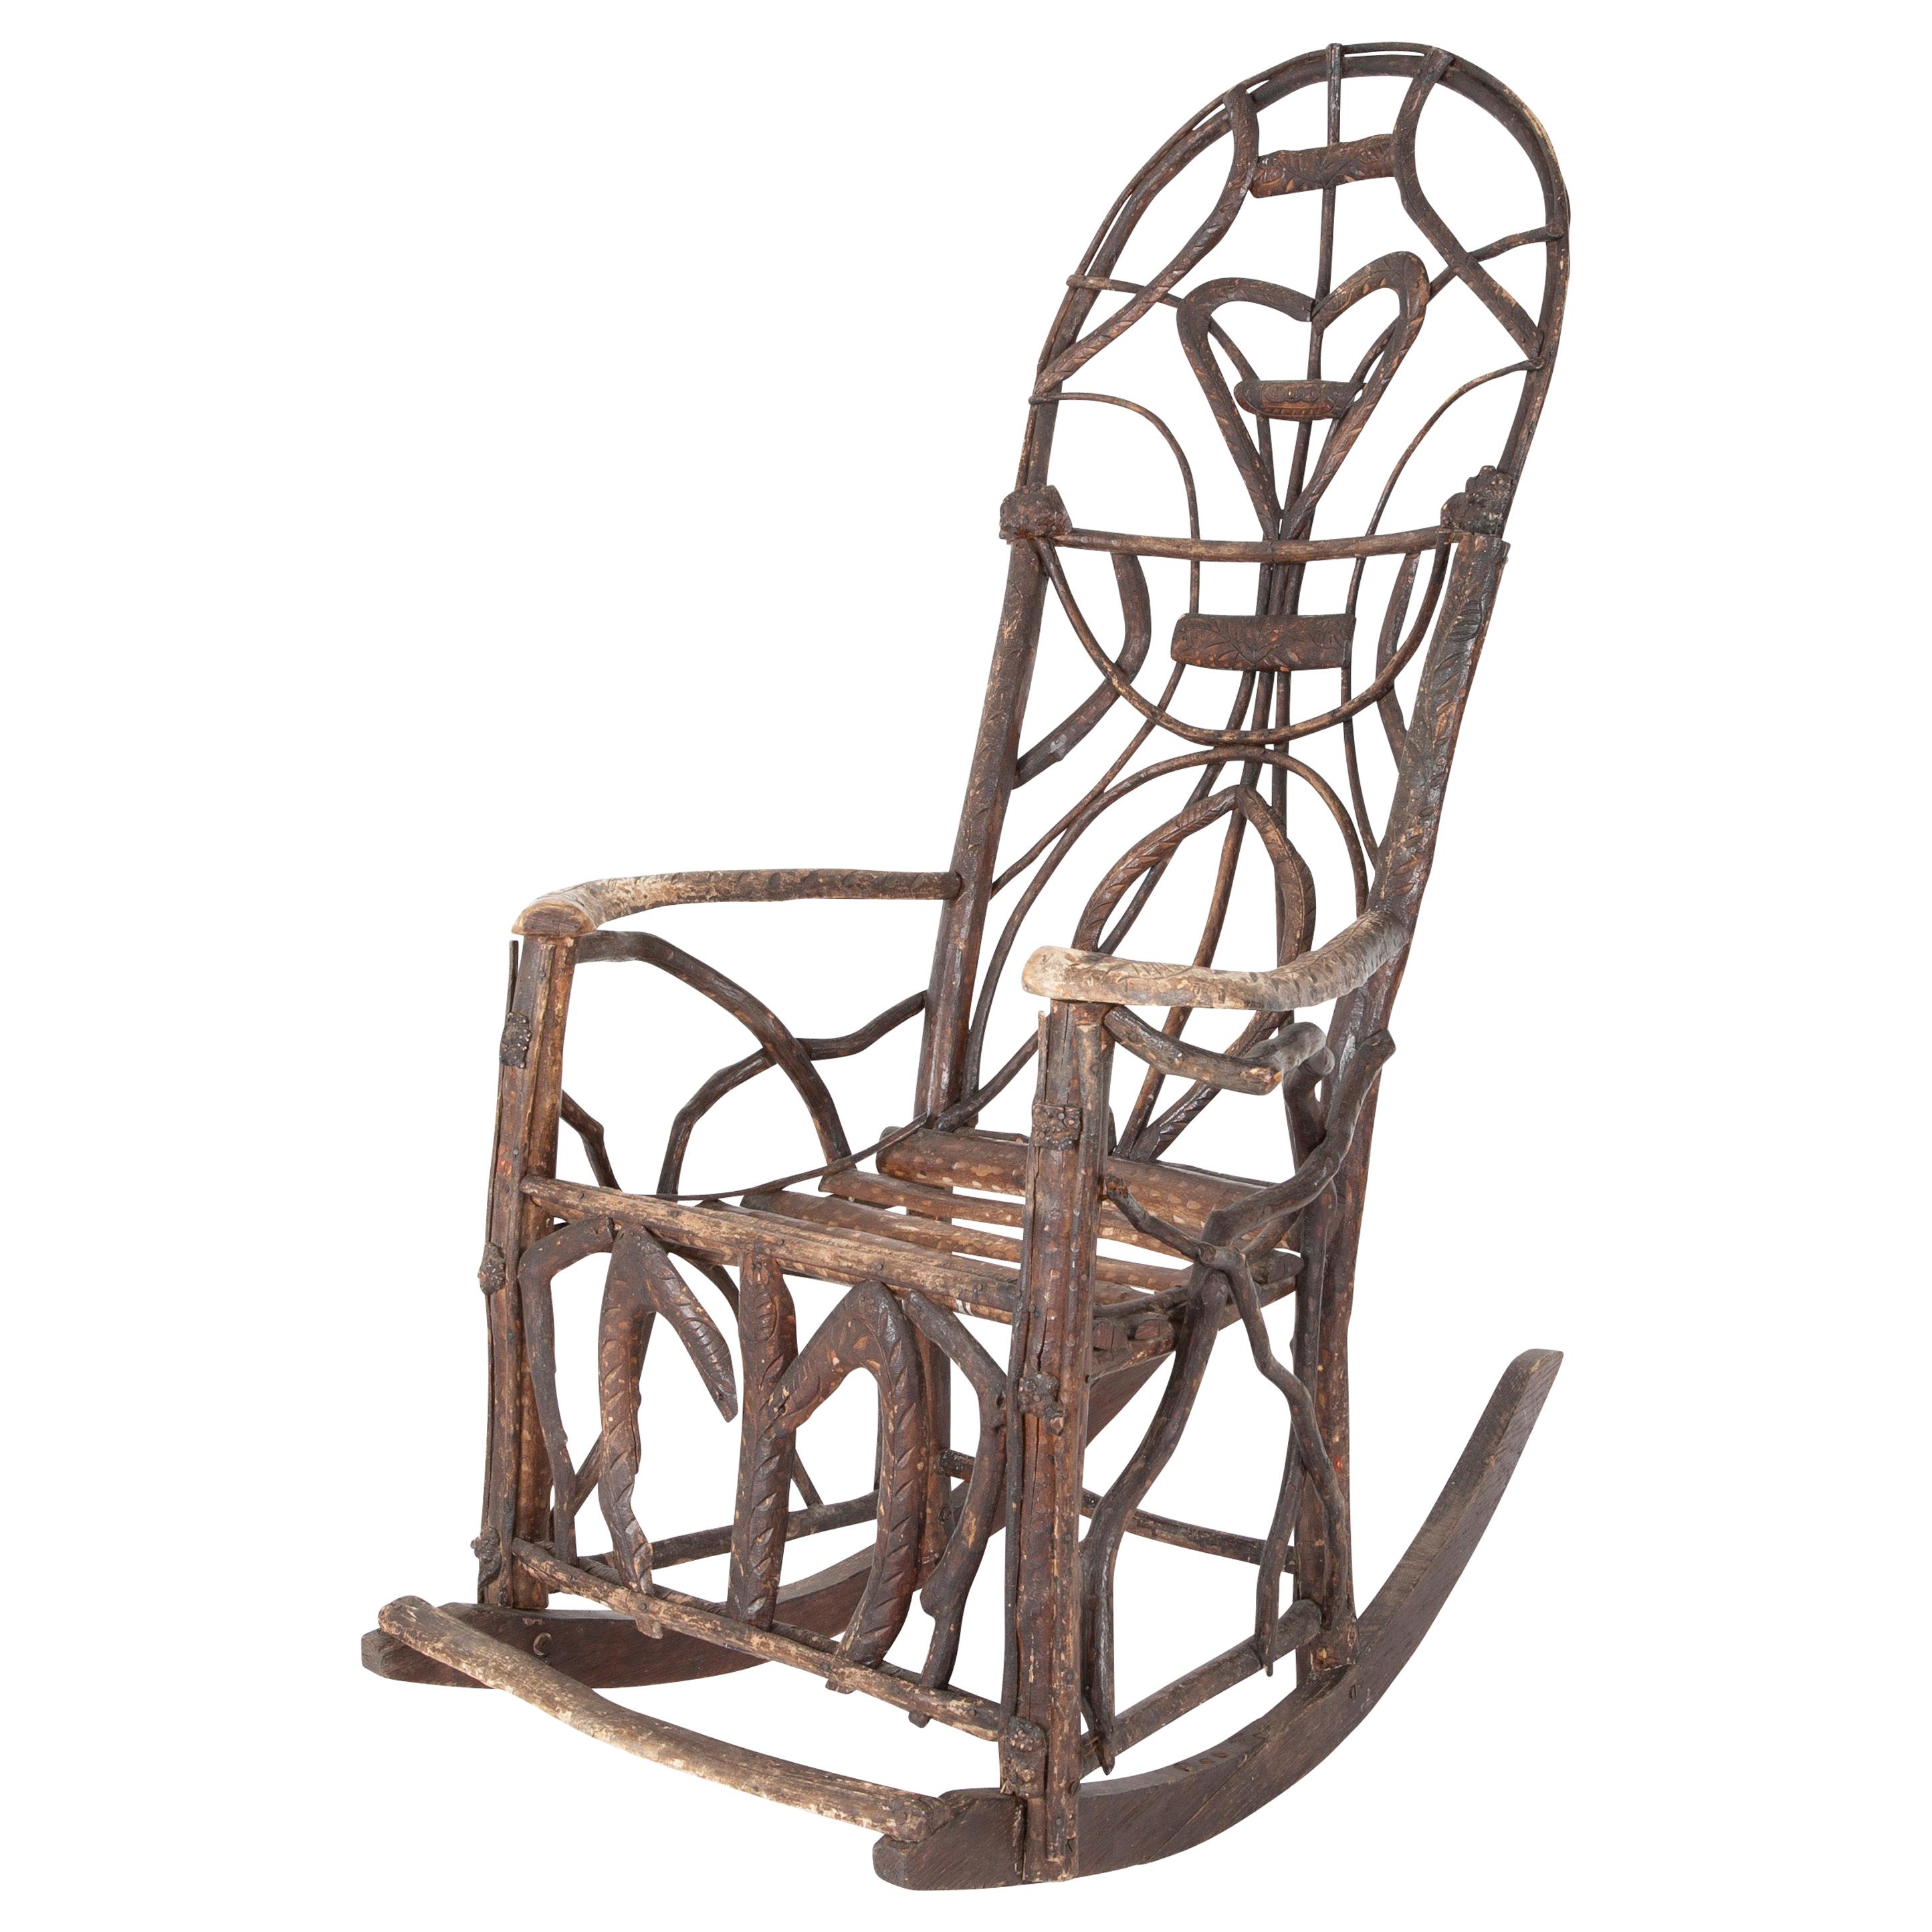 Rustic Rocking Chair Attributed to Rev. Ben Davis of Blowing Rock, NC